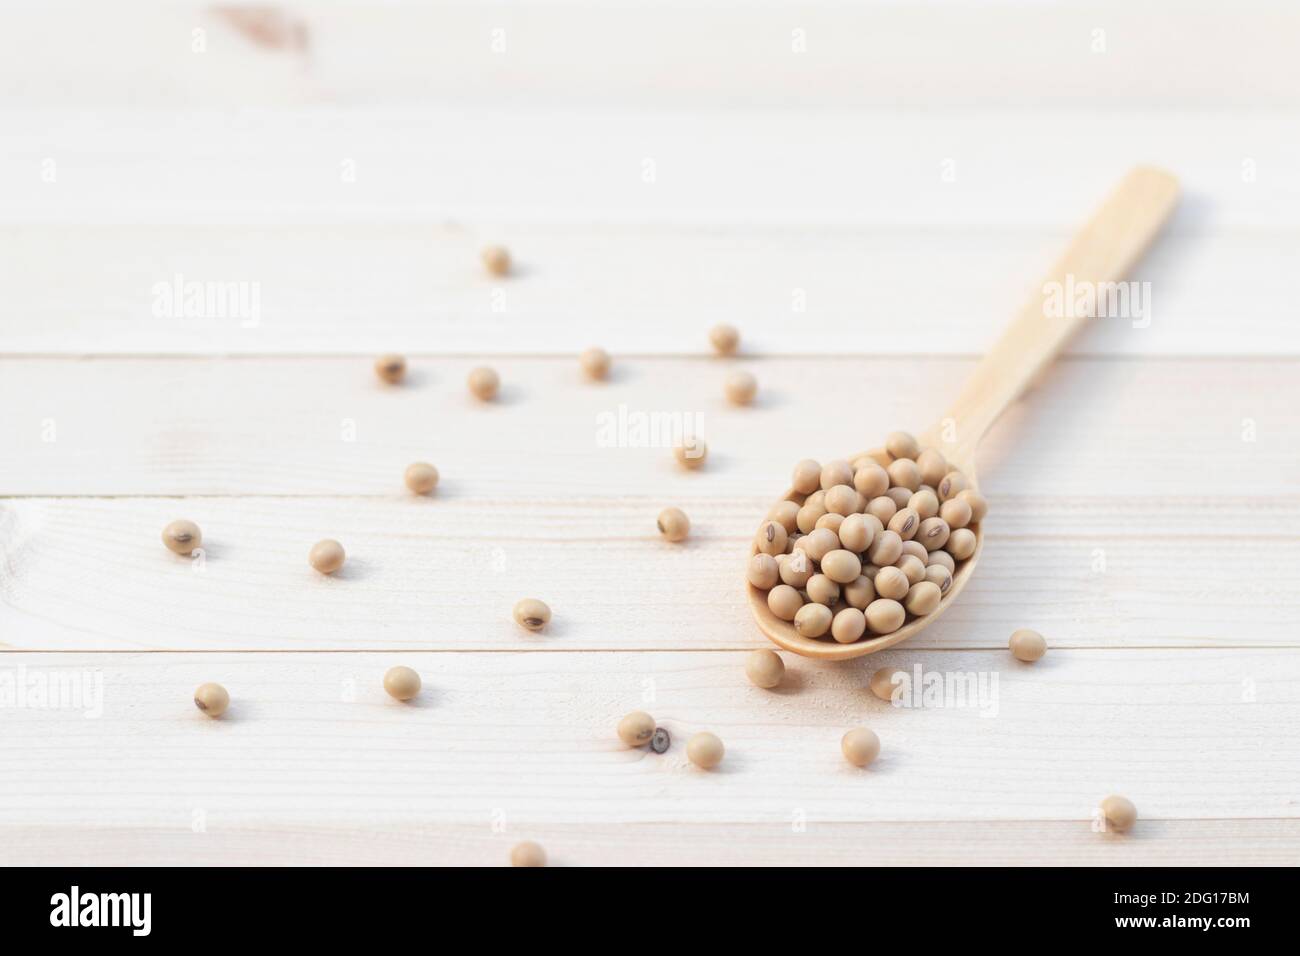 Soybean seeds on a wooden spoon with light pine wood background. Stock Photo